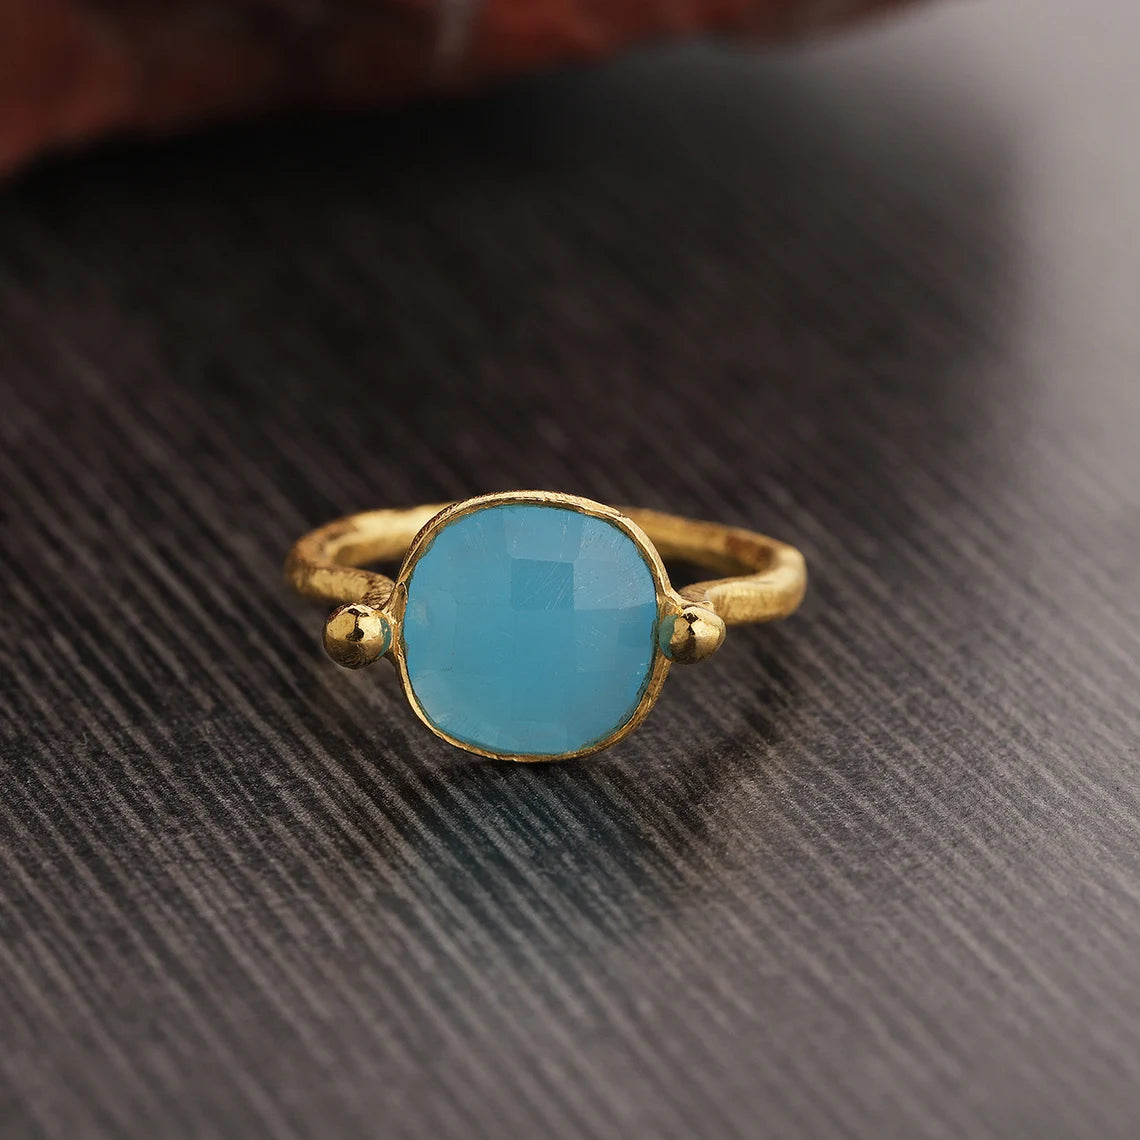 Blue Chalcedony ring, trendy designs for her, gold ring, Cushion ring, cobalt blue gemstone, birthstone ring birthday gifts for her